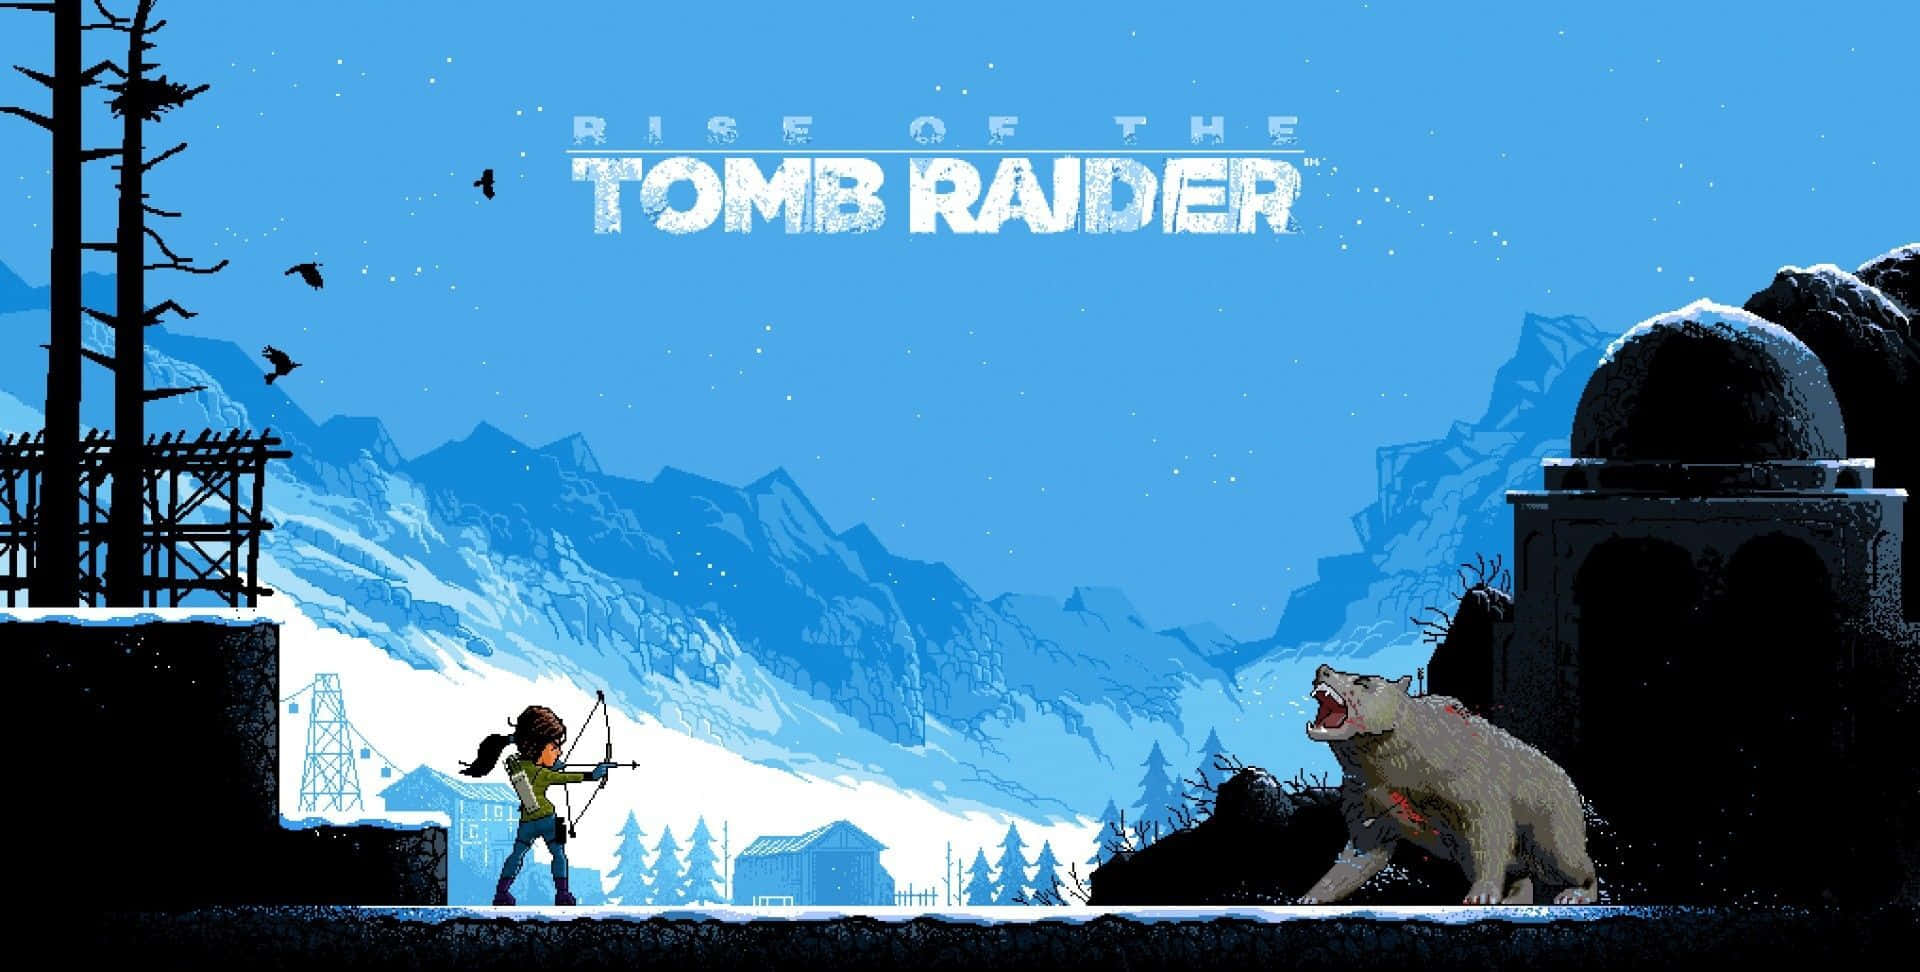 The Tomb Raider Is Shown In The Snow